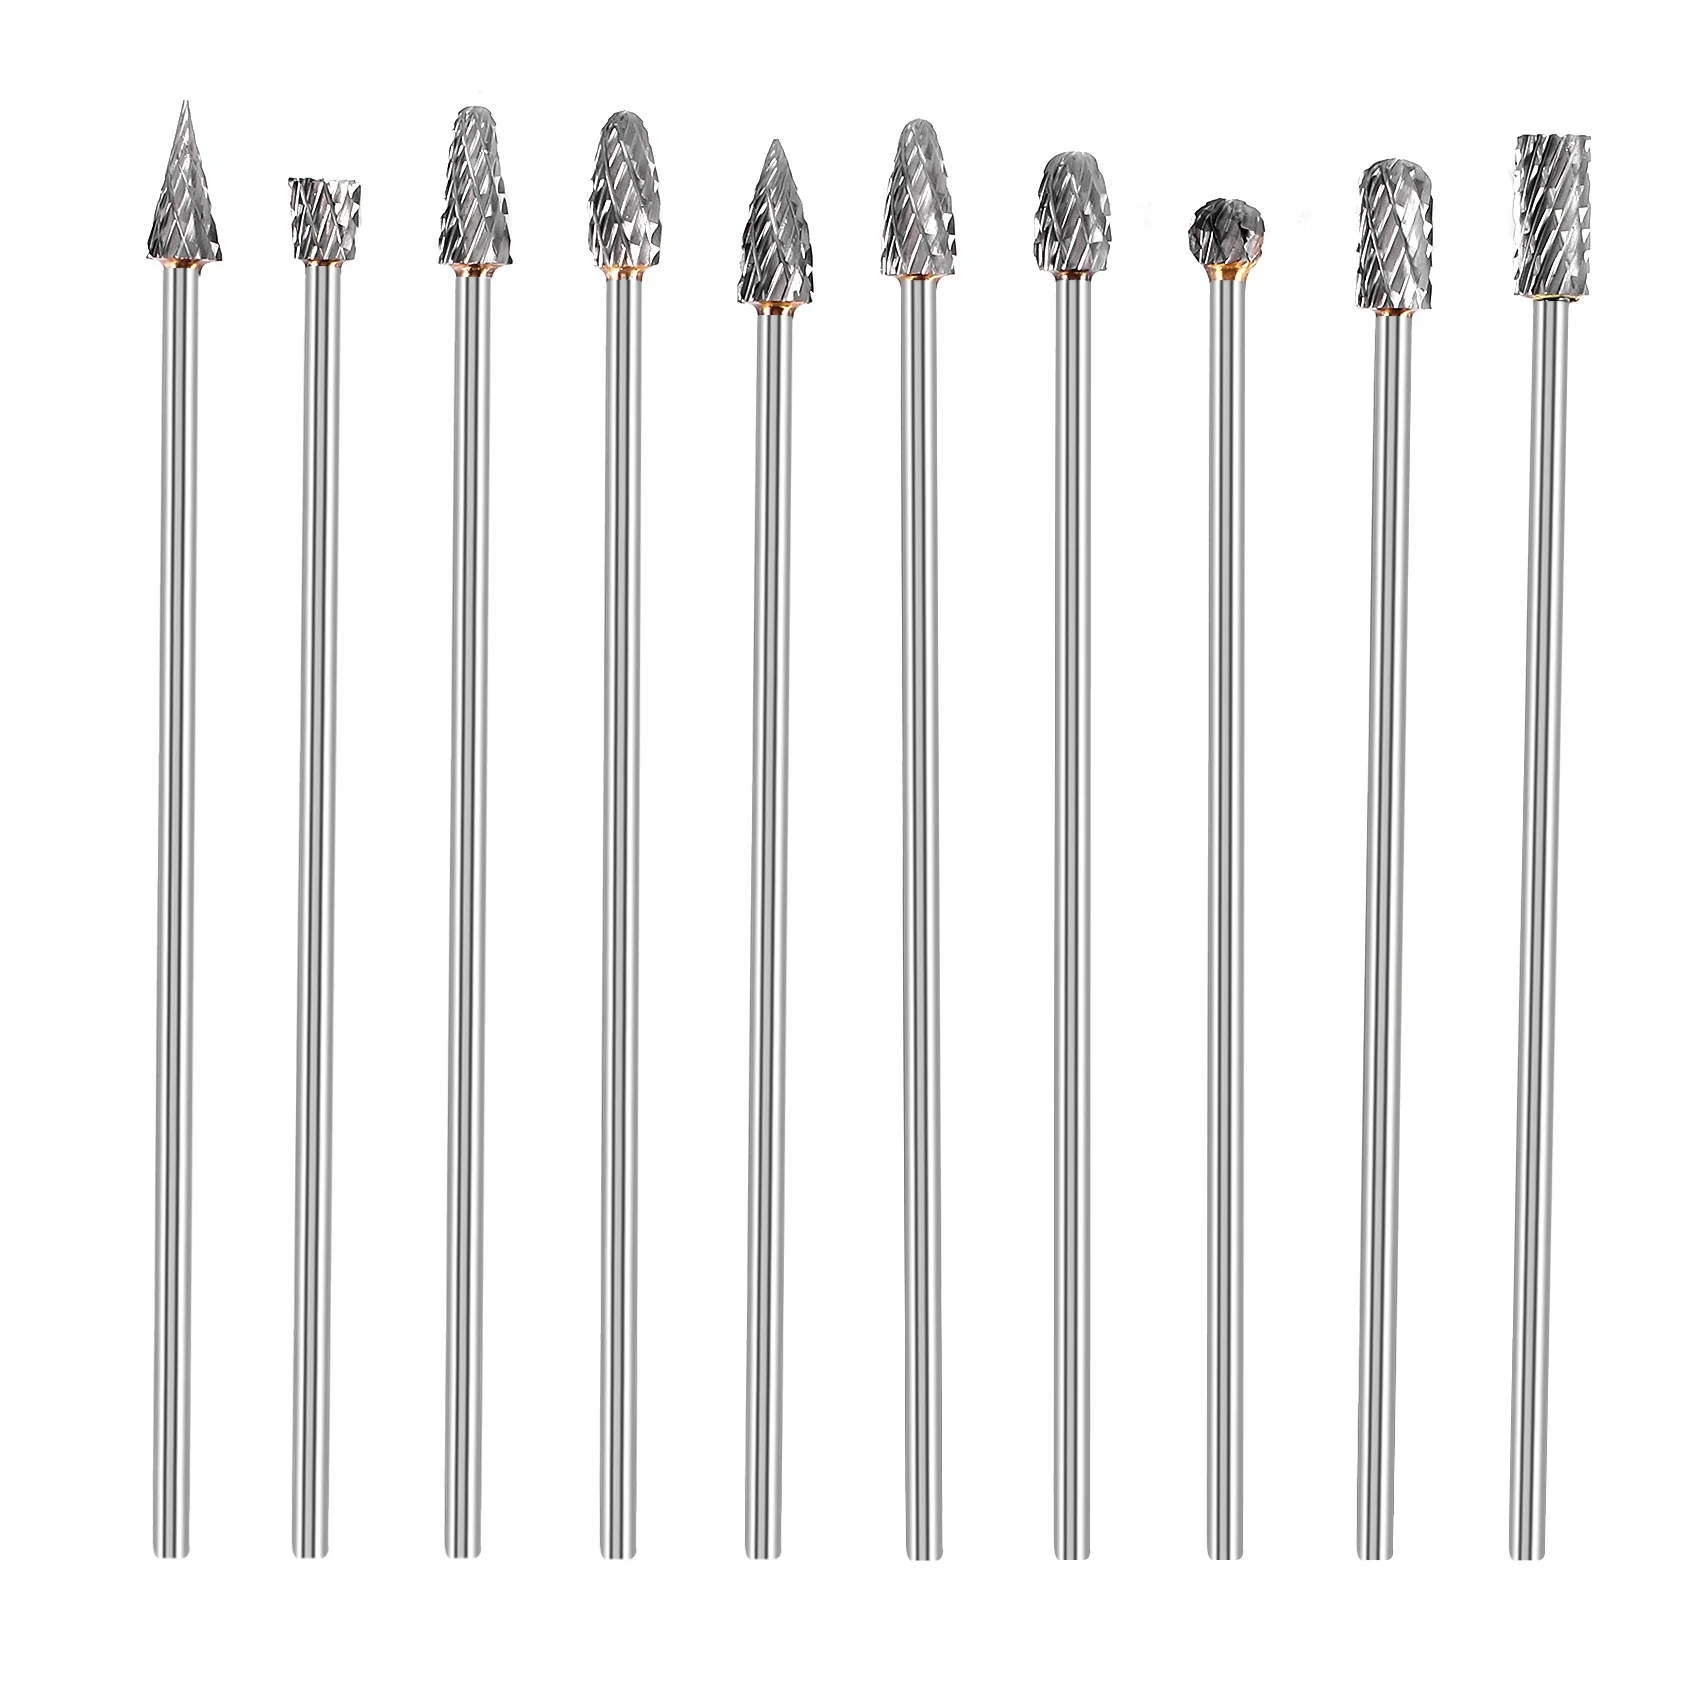 

10Pc 4 Inch Long Double Cut Tungsten Solid Carbide Rotary Burrs Set 1/8 Inch(3mm) Shank Twist Drill Bit for Rotary Tools